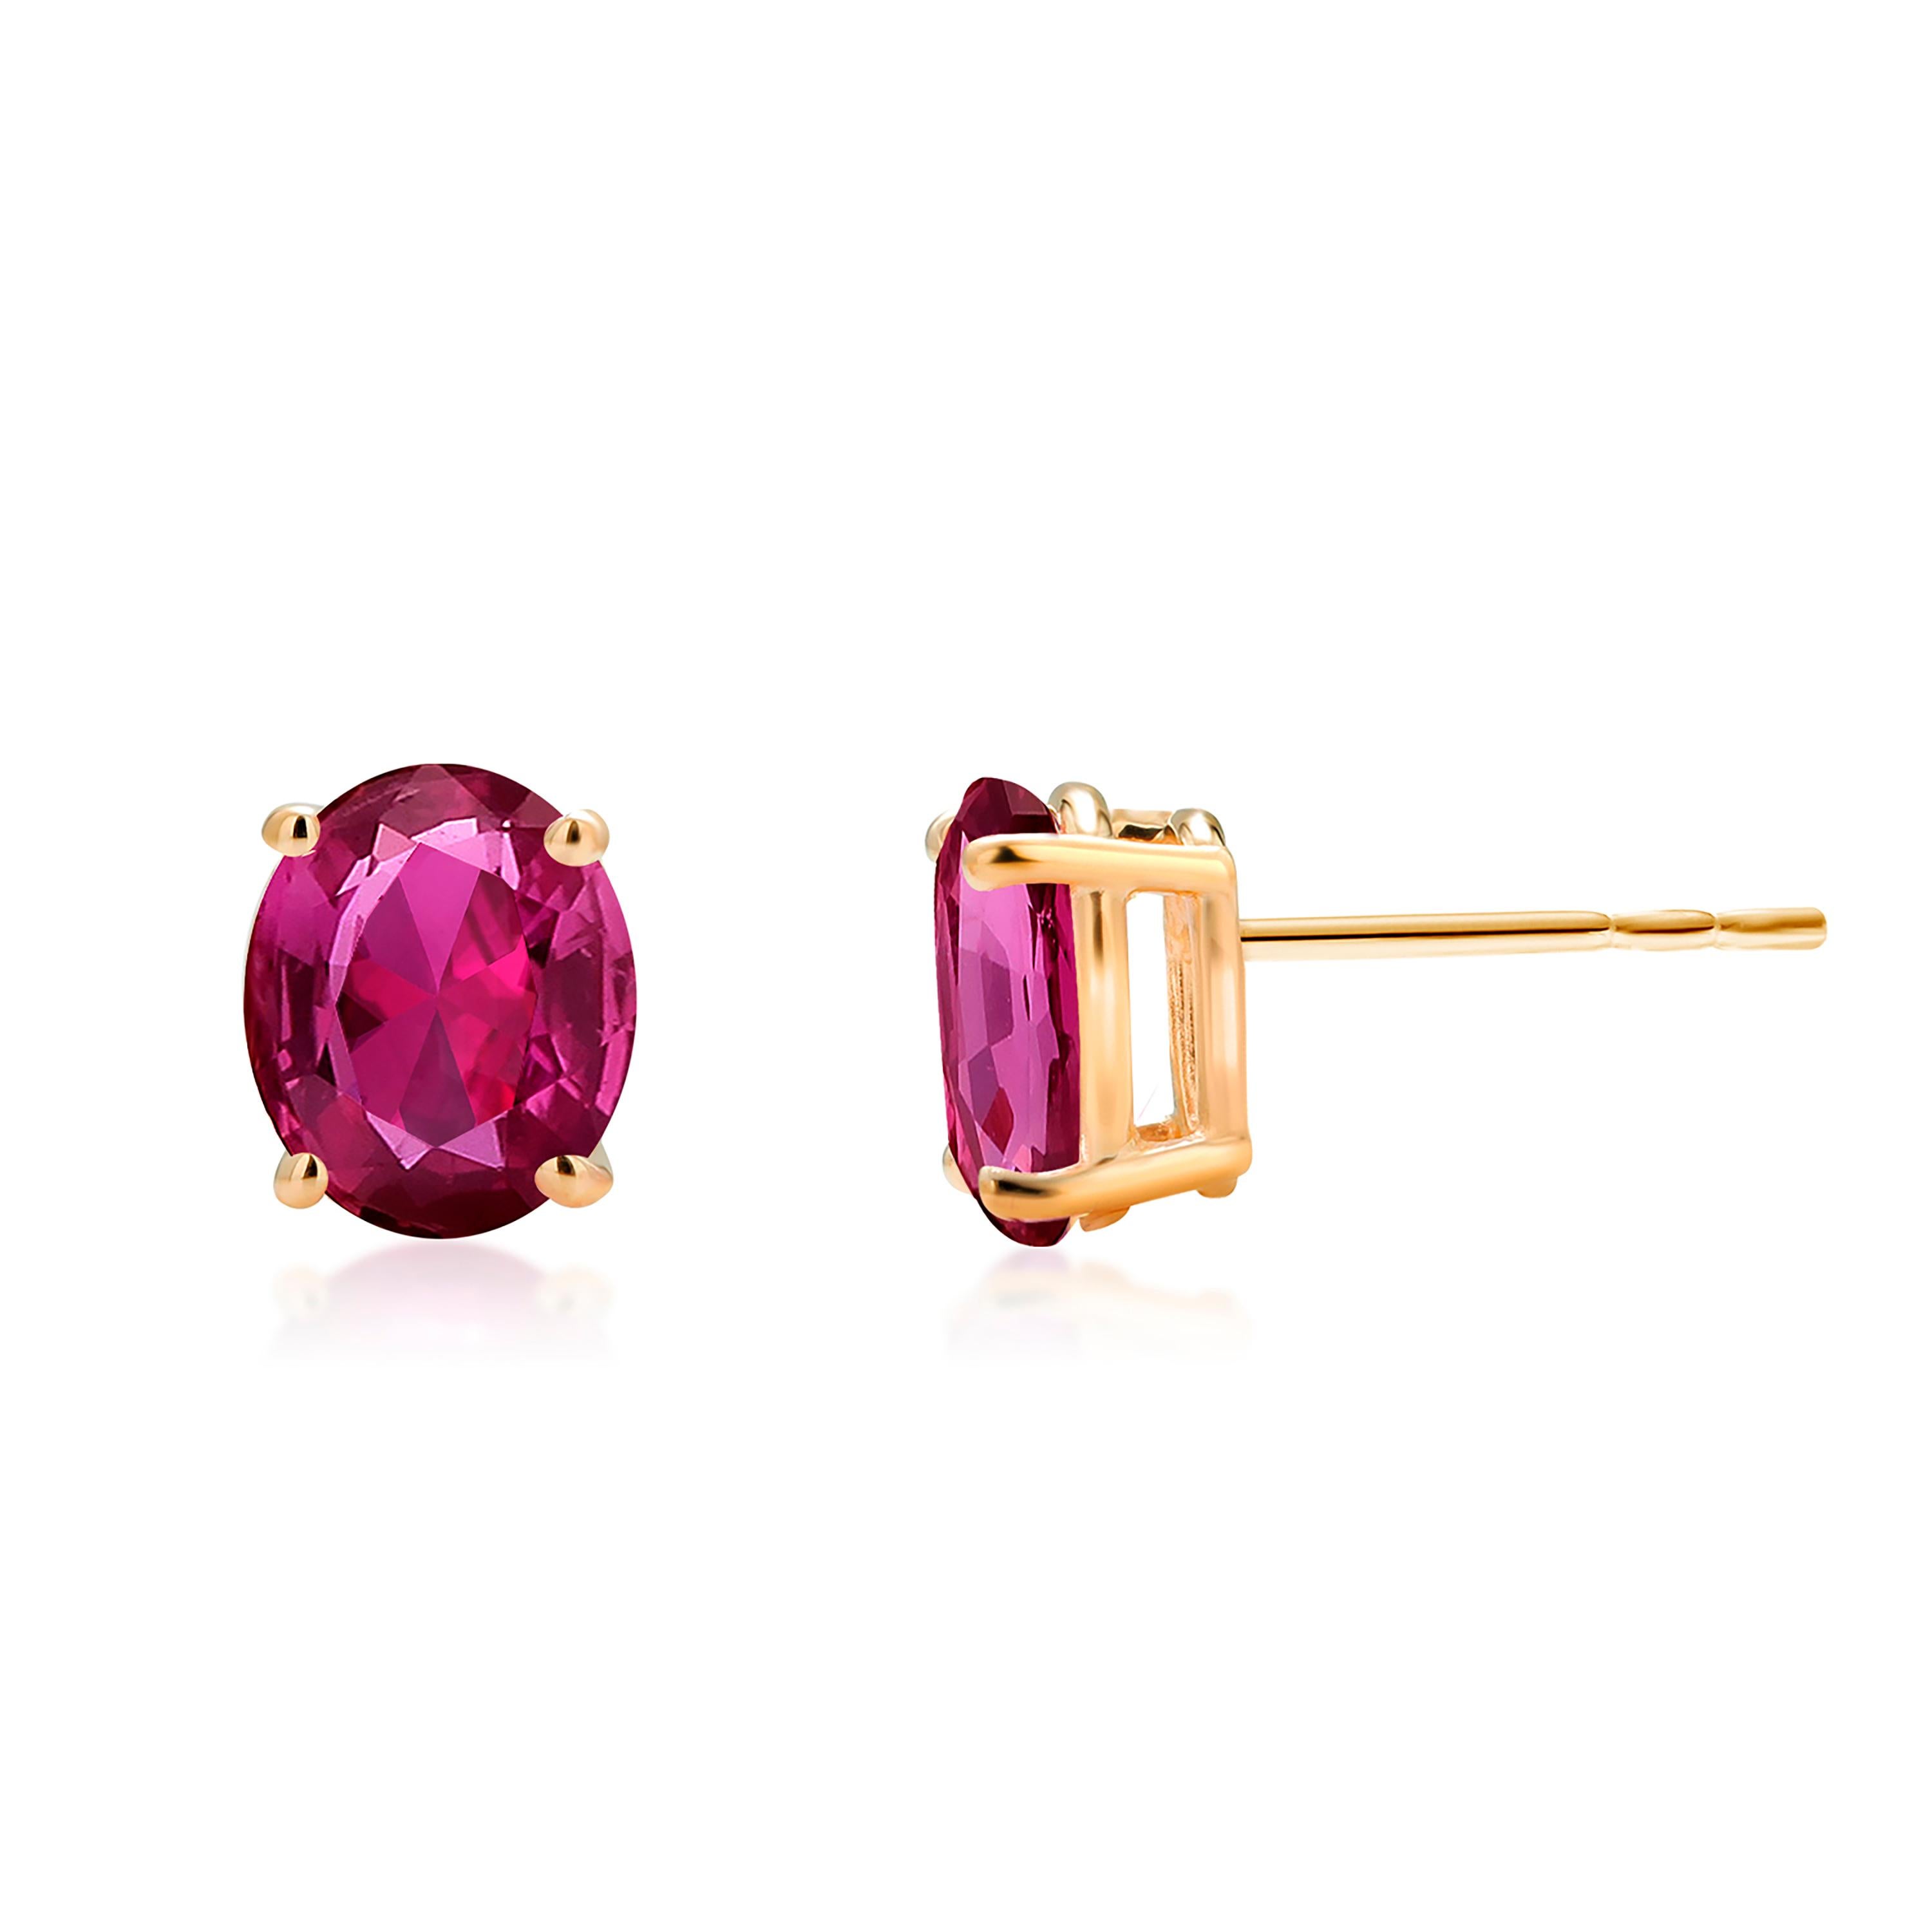 Oval Shaped Mini Rubies Set in Yellow Gold Stud Earrings For Sale 3